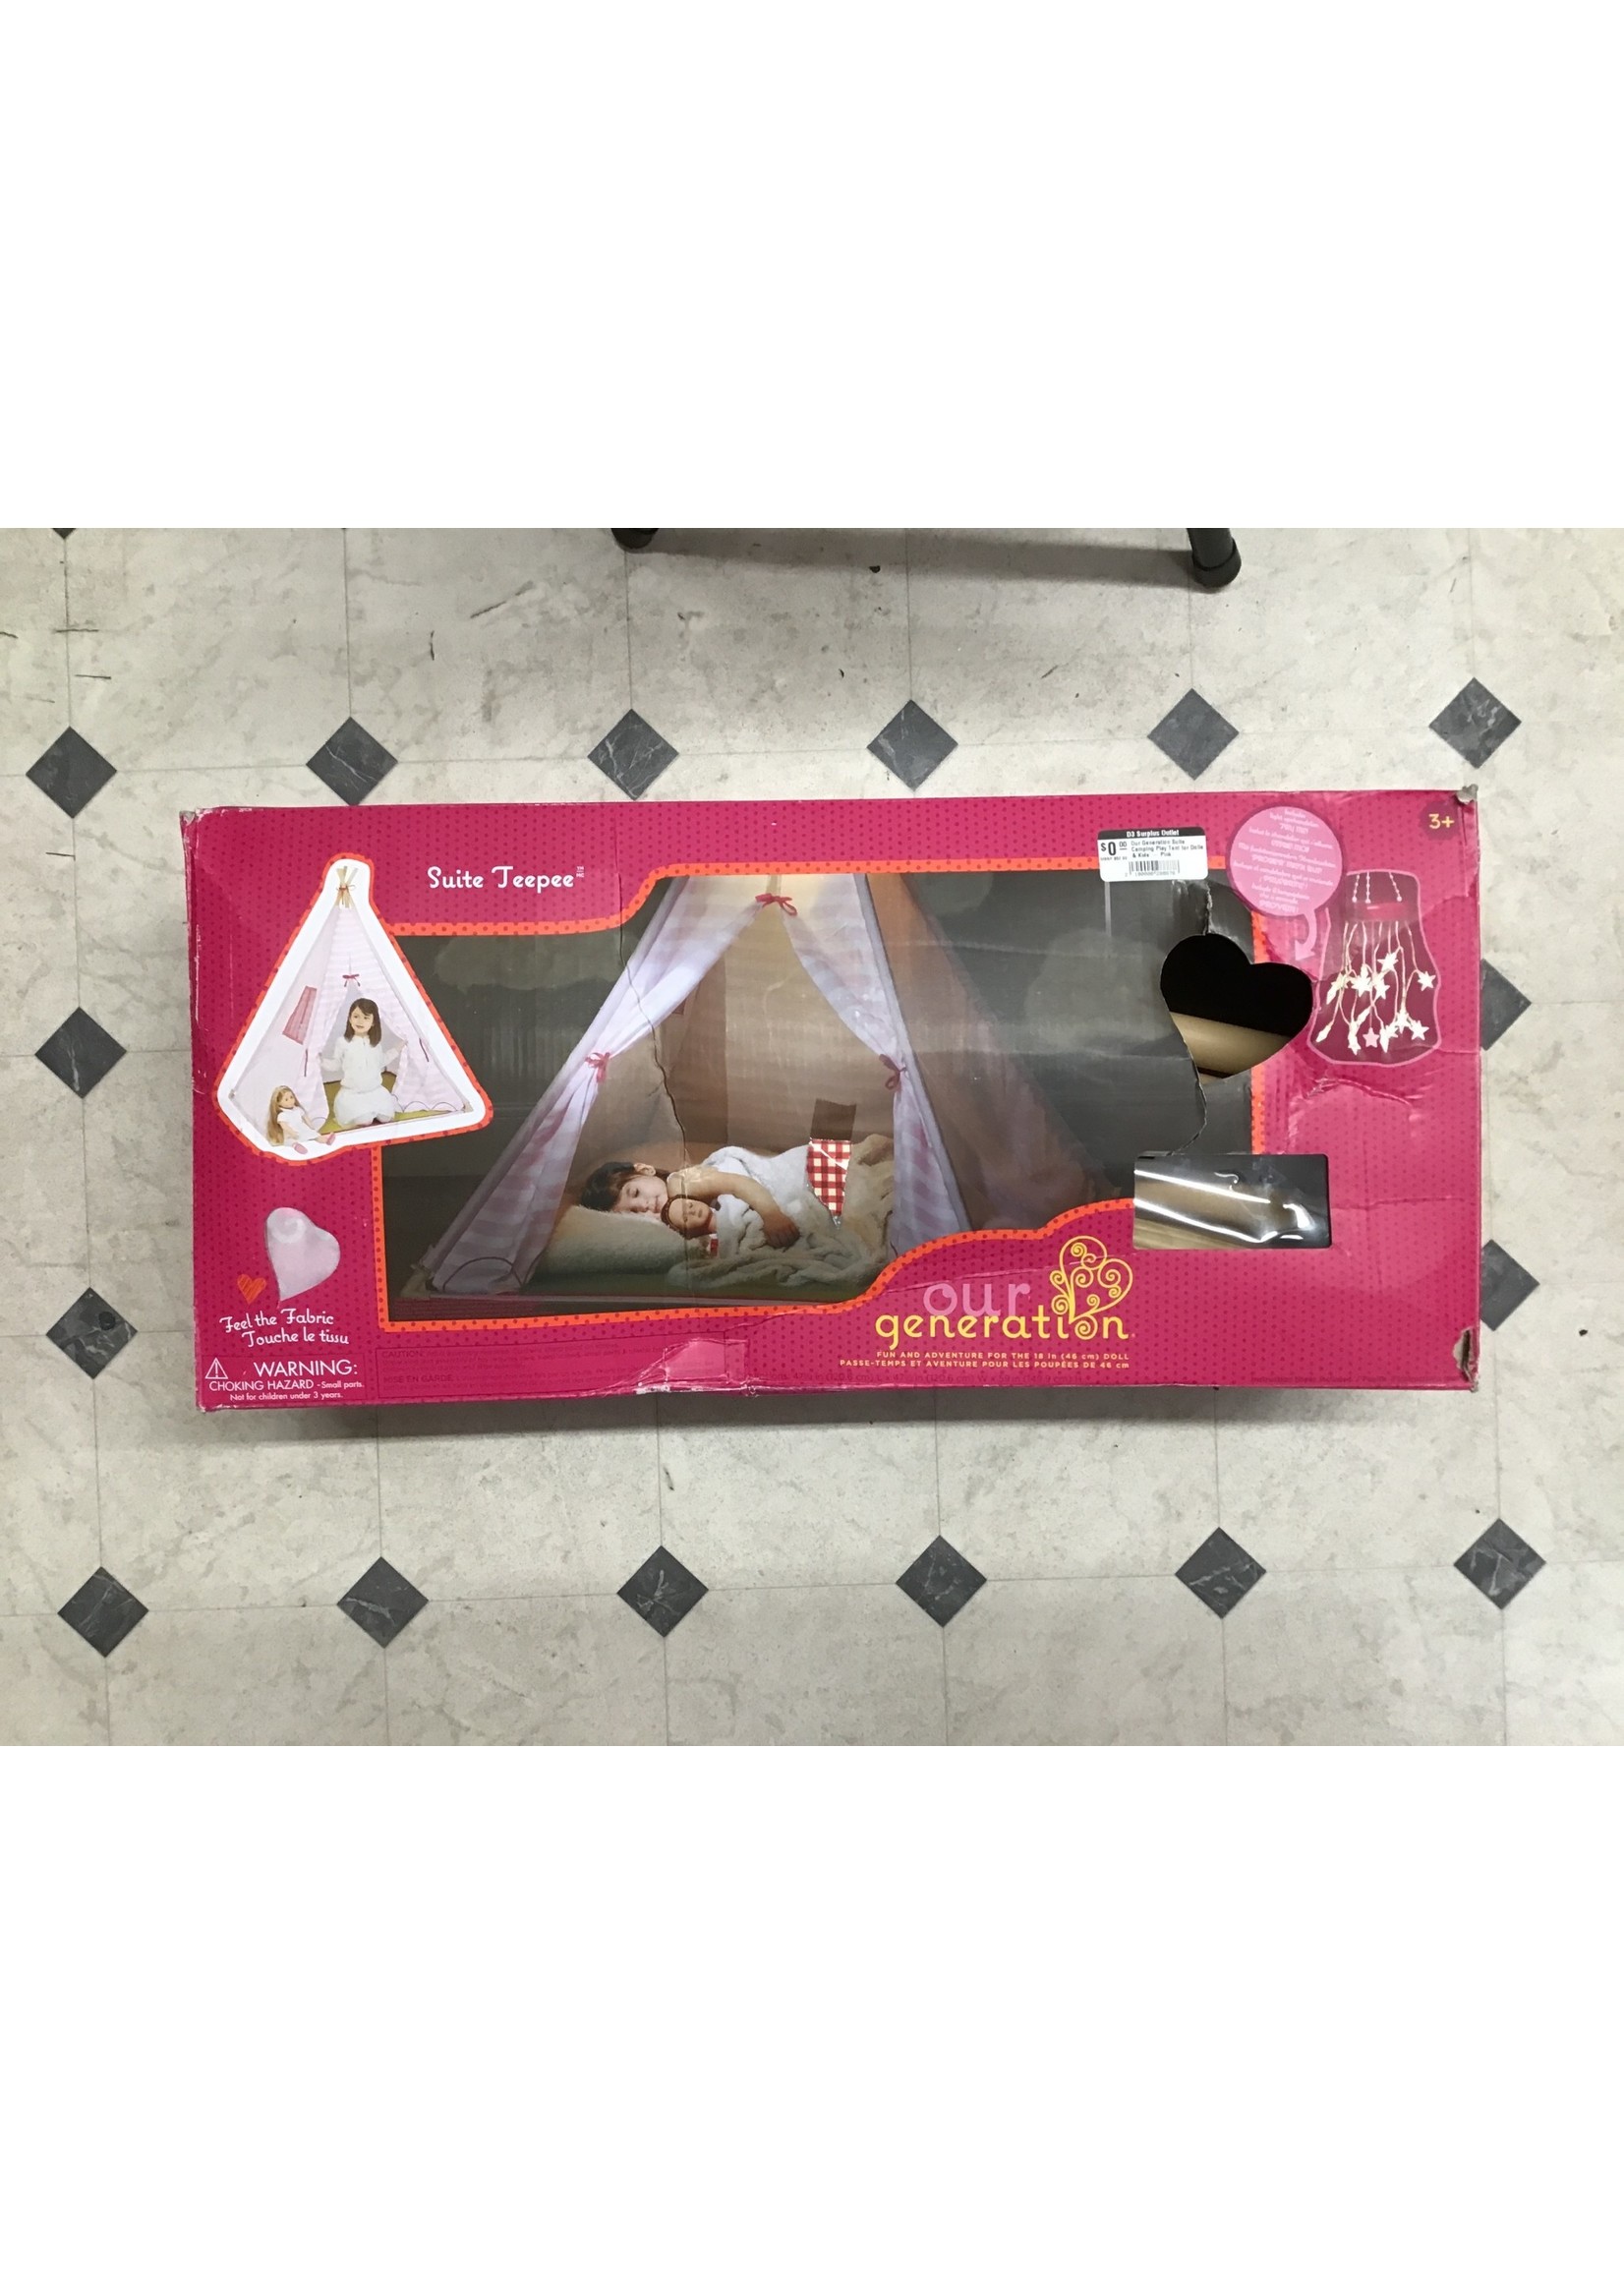 *opened*Our Generation Suite Camping Play Tent for Dolls & Kids' - Pink